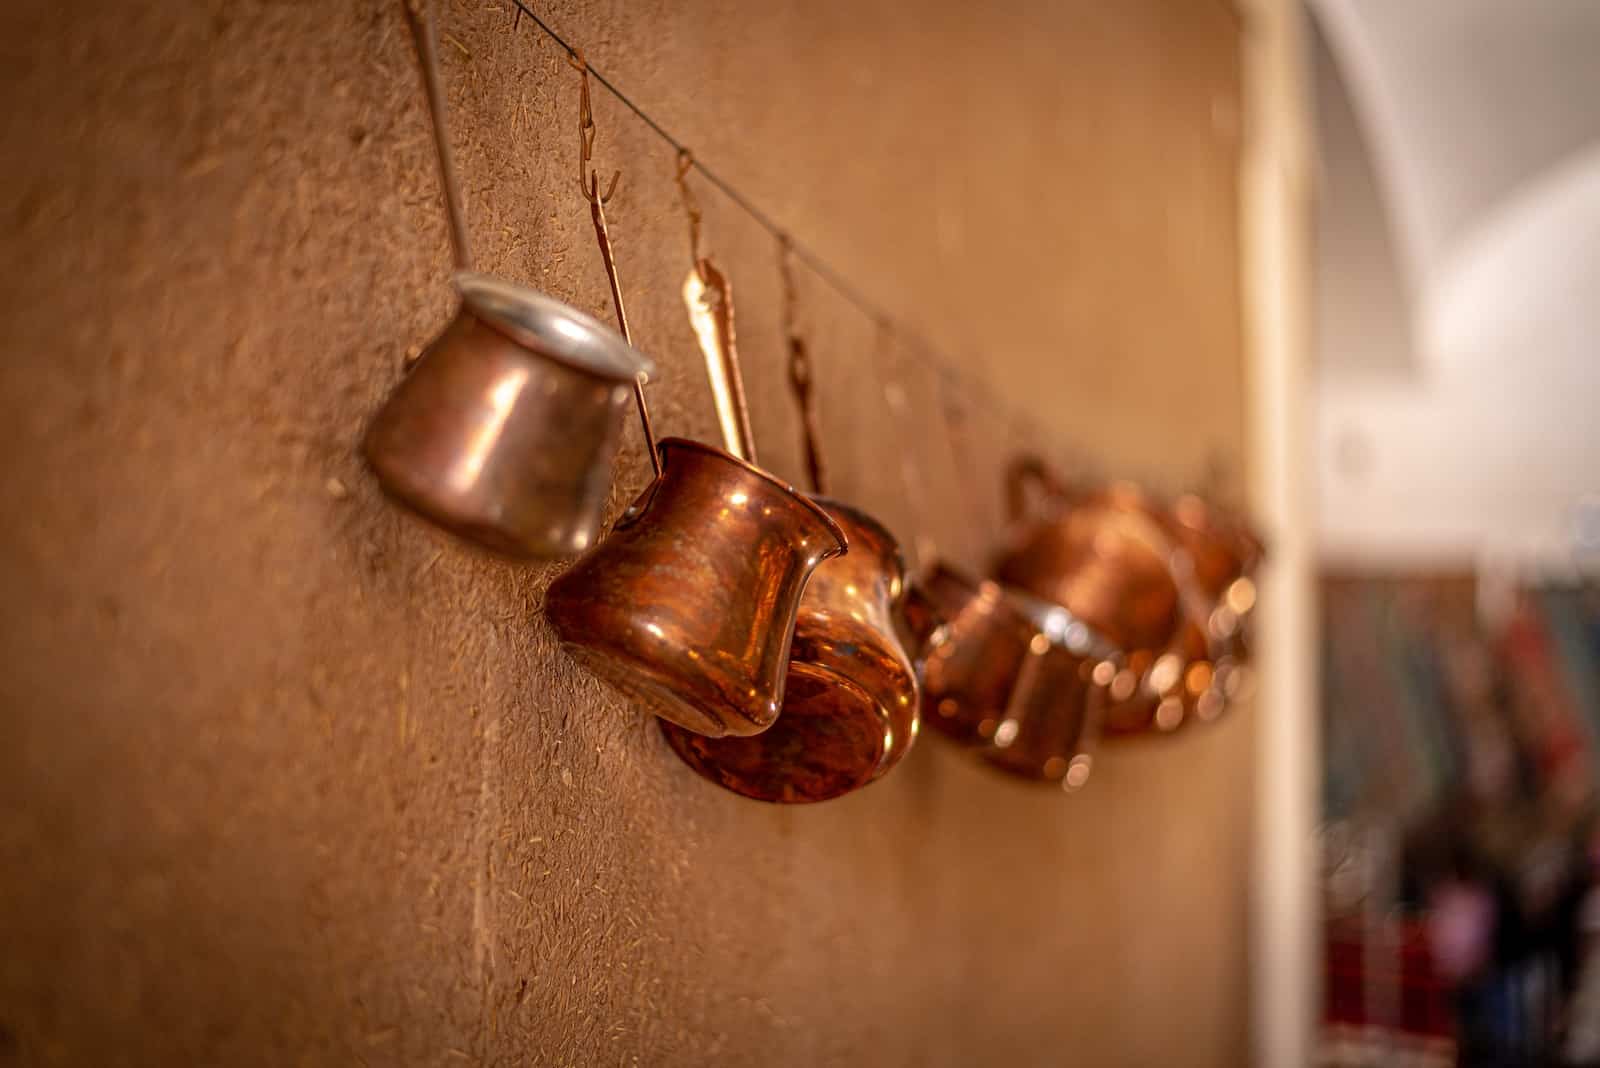 brass-colored cook ware hangs on wall